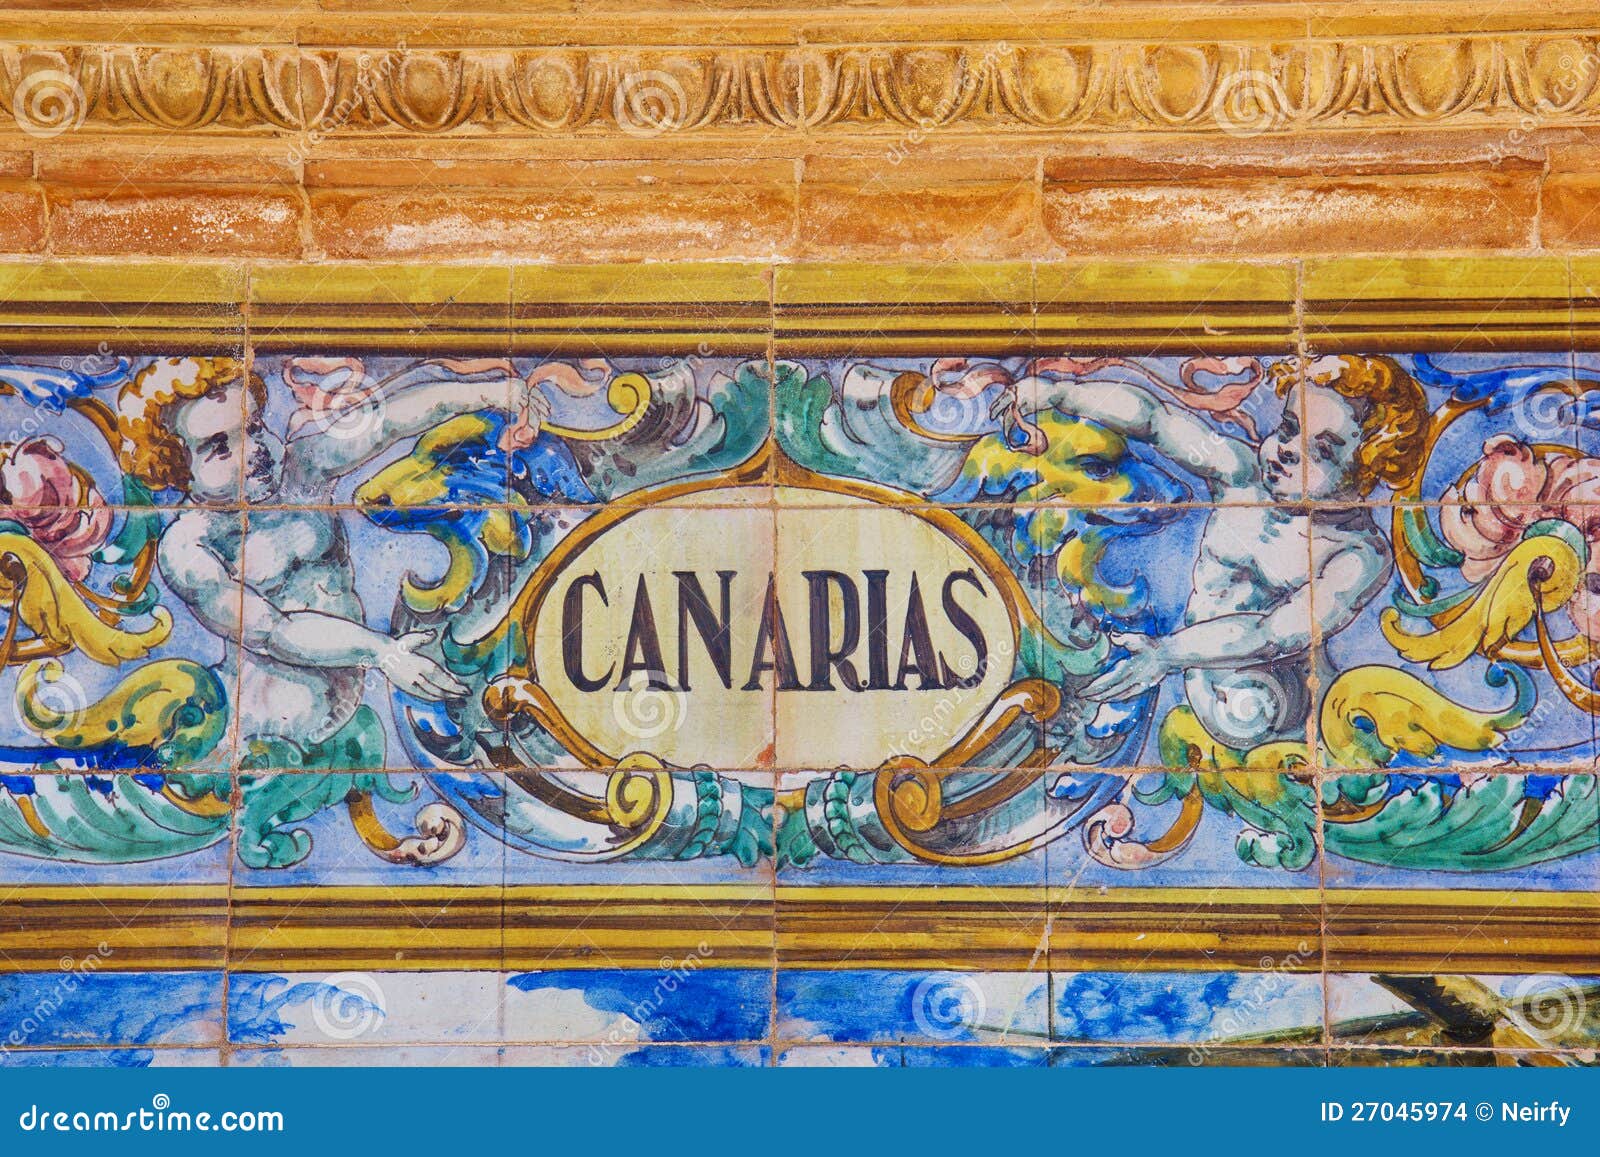 canarias sign over a mosaic wall